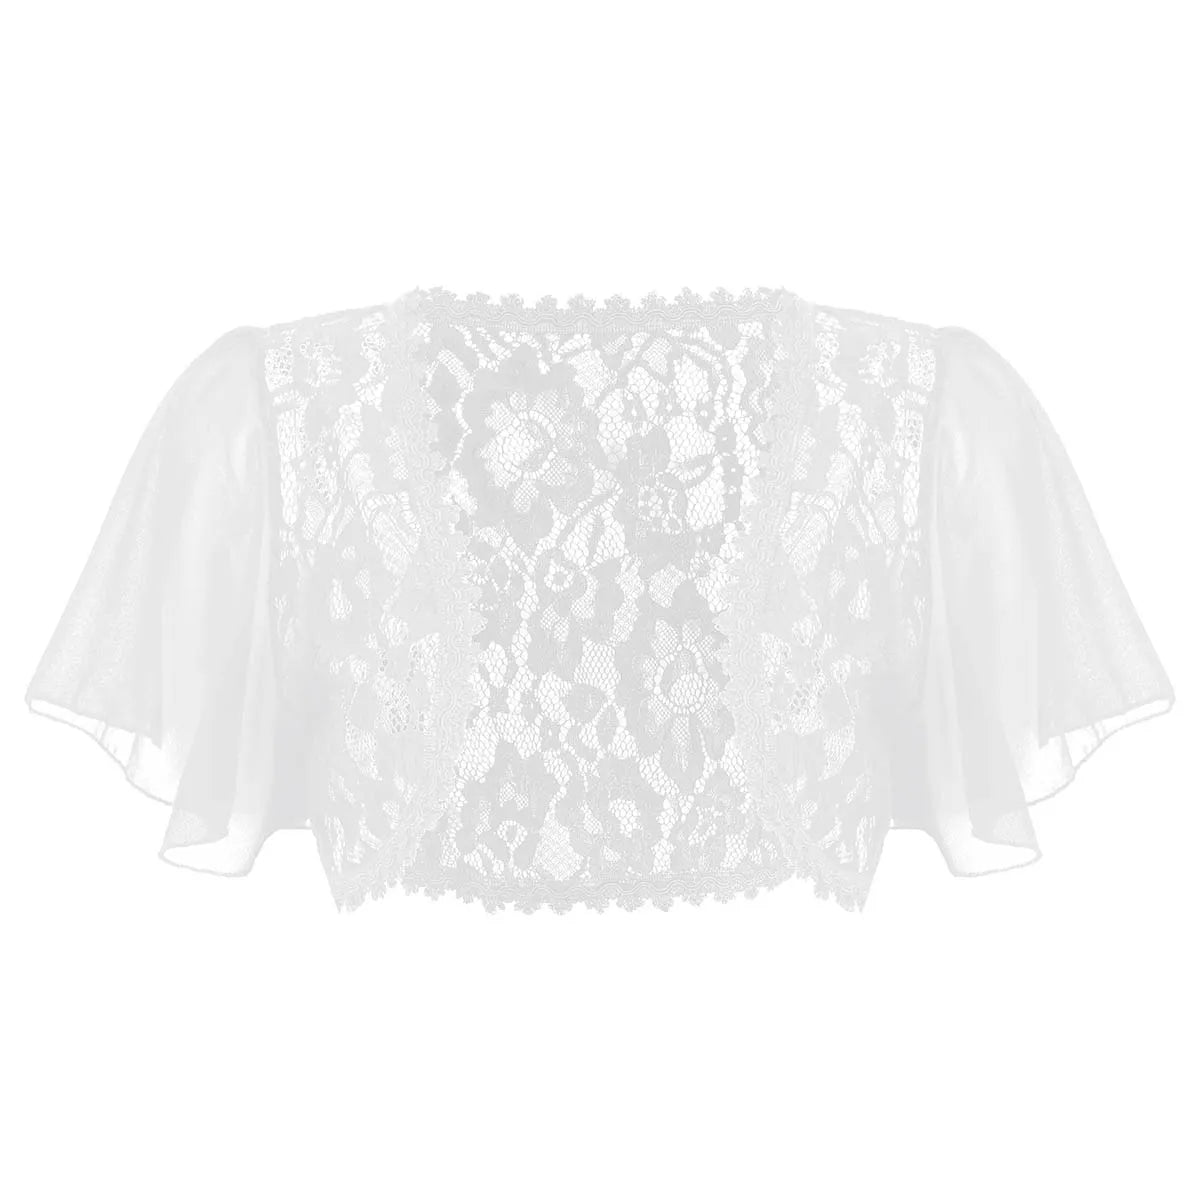 Shrugged- the 1930s Inspired Lace Shrug 2 Colors